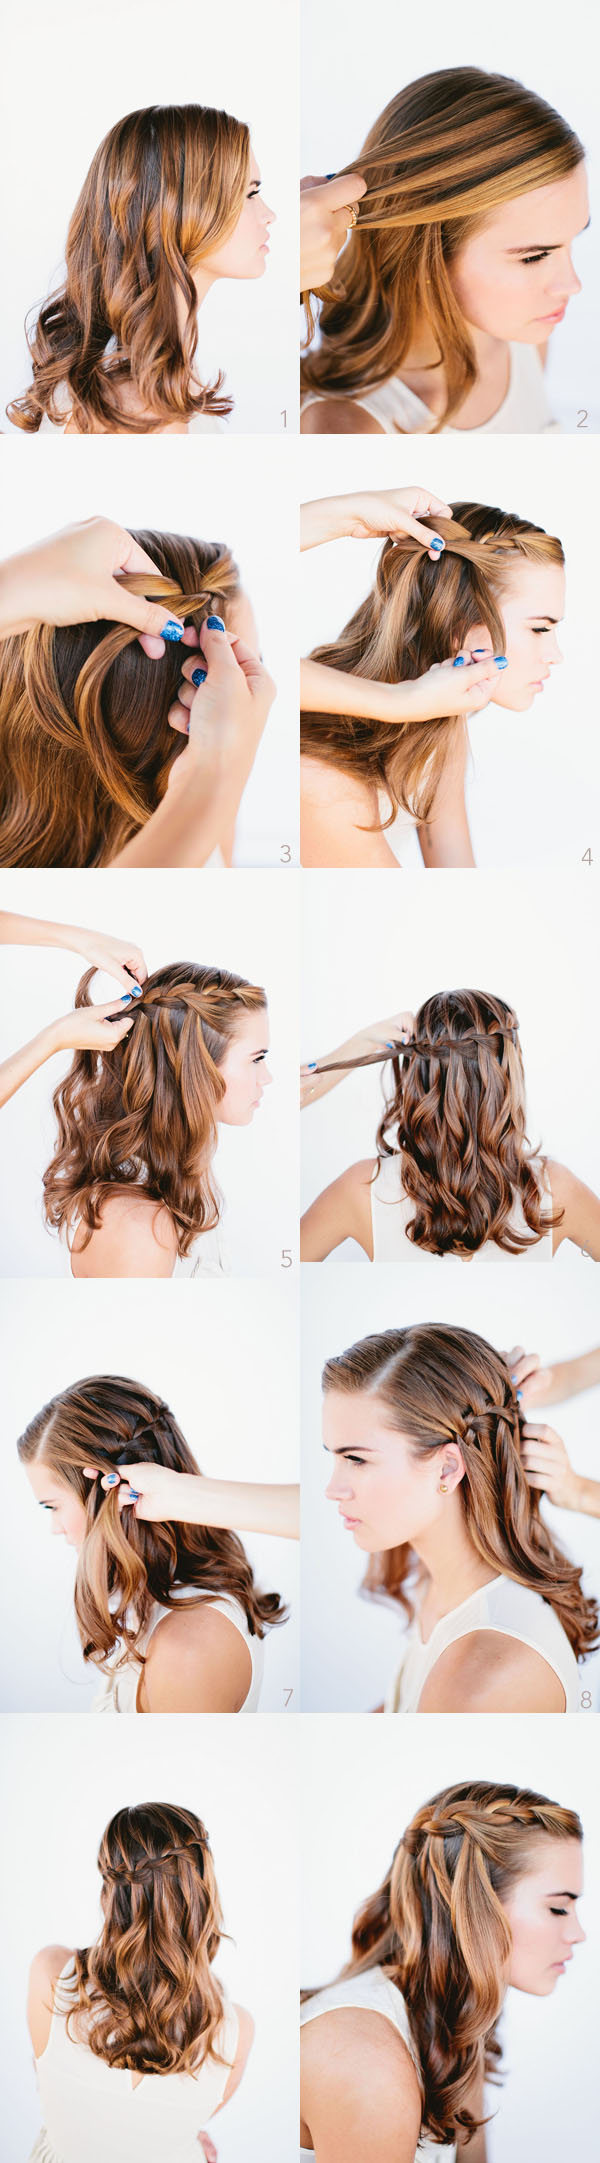 20 Beautiful Hairstyles for Long Hair Step by Step Pictures - Snappy ...